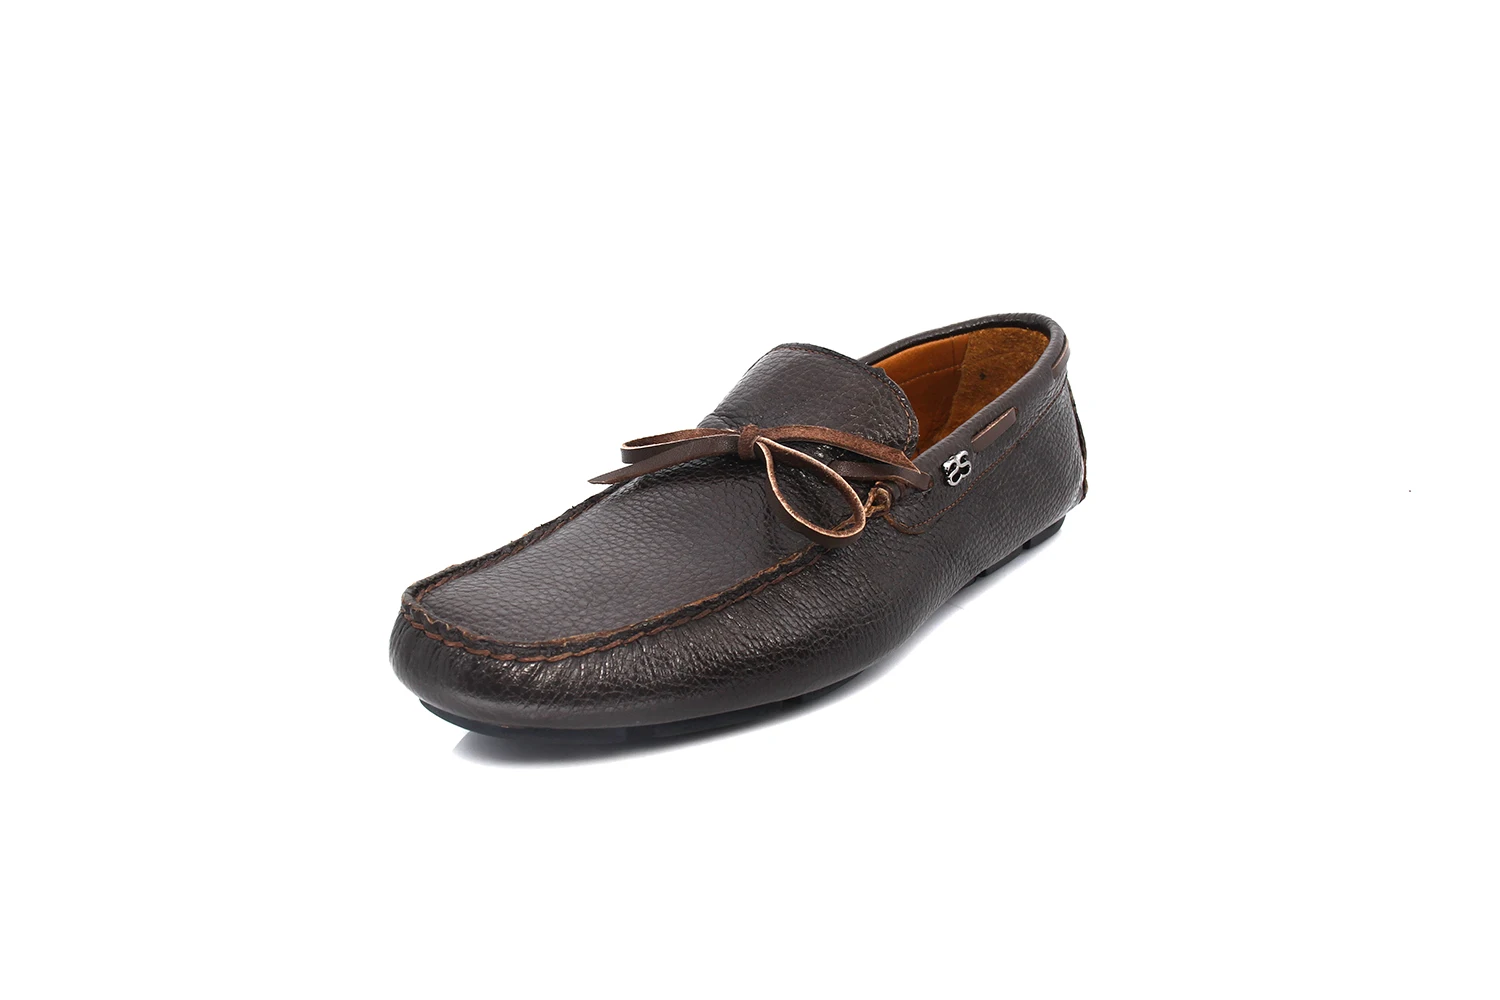 

Shenbin's Handmade Loafers with Floater Leather, Brown, Black and Dark Blue, Shenbins Exclusive Men's Footwear